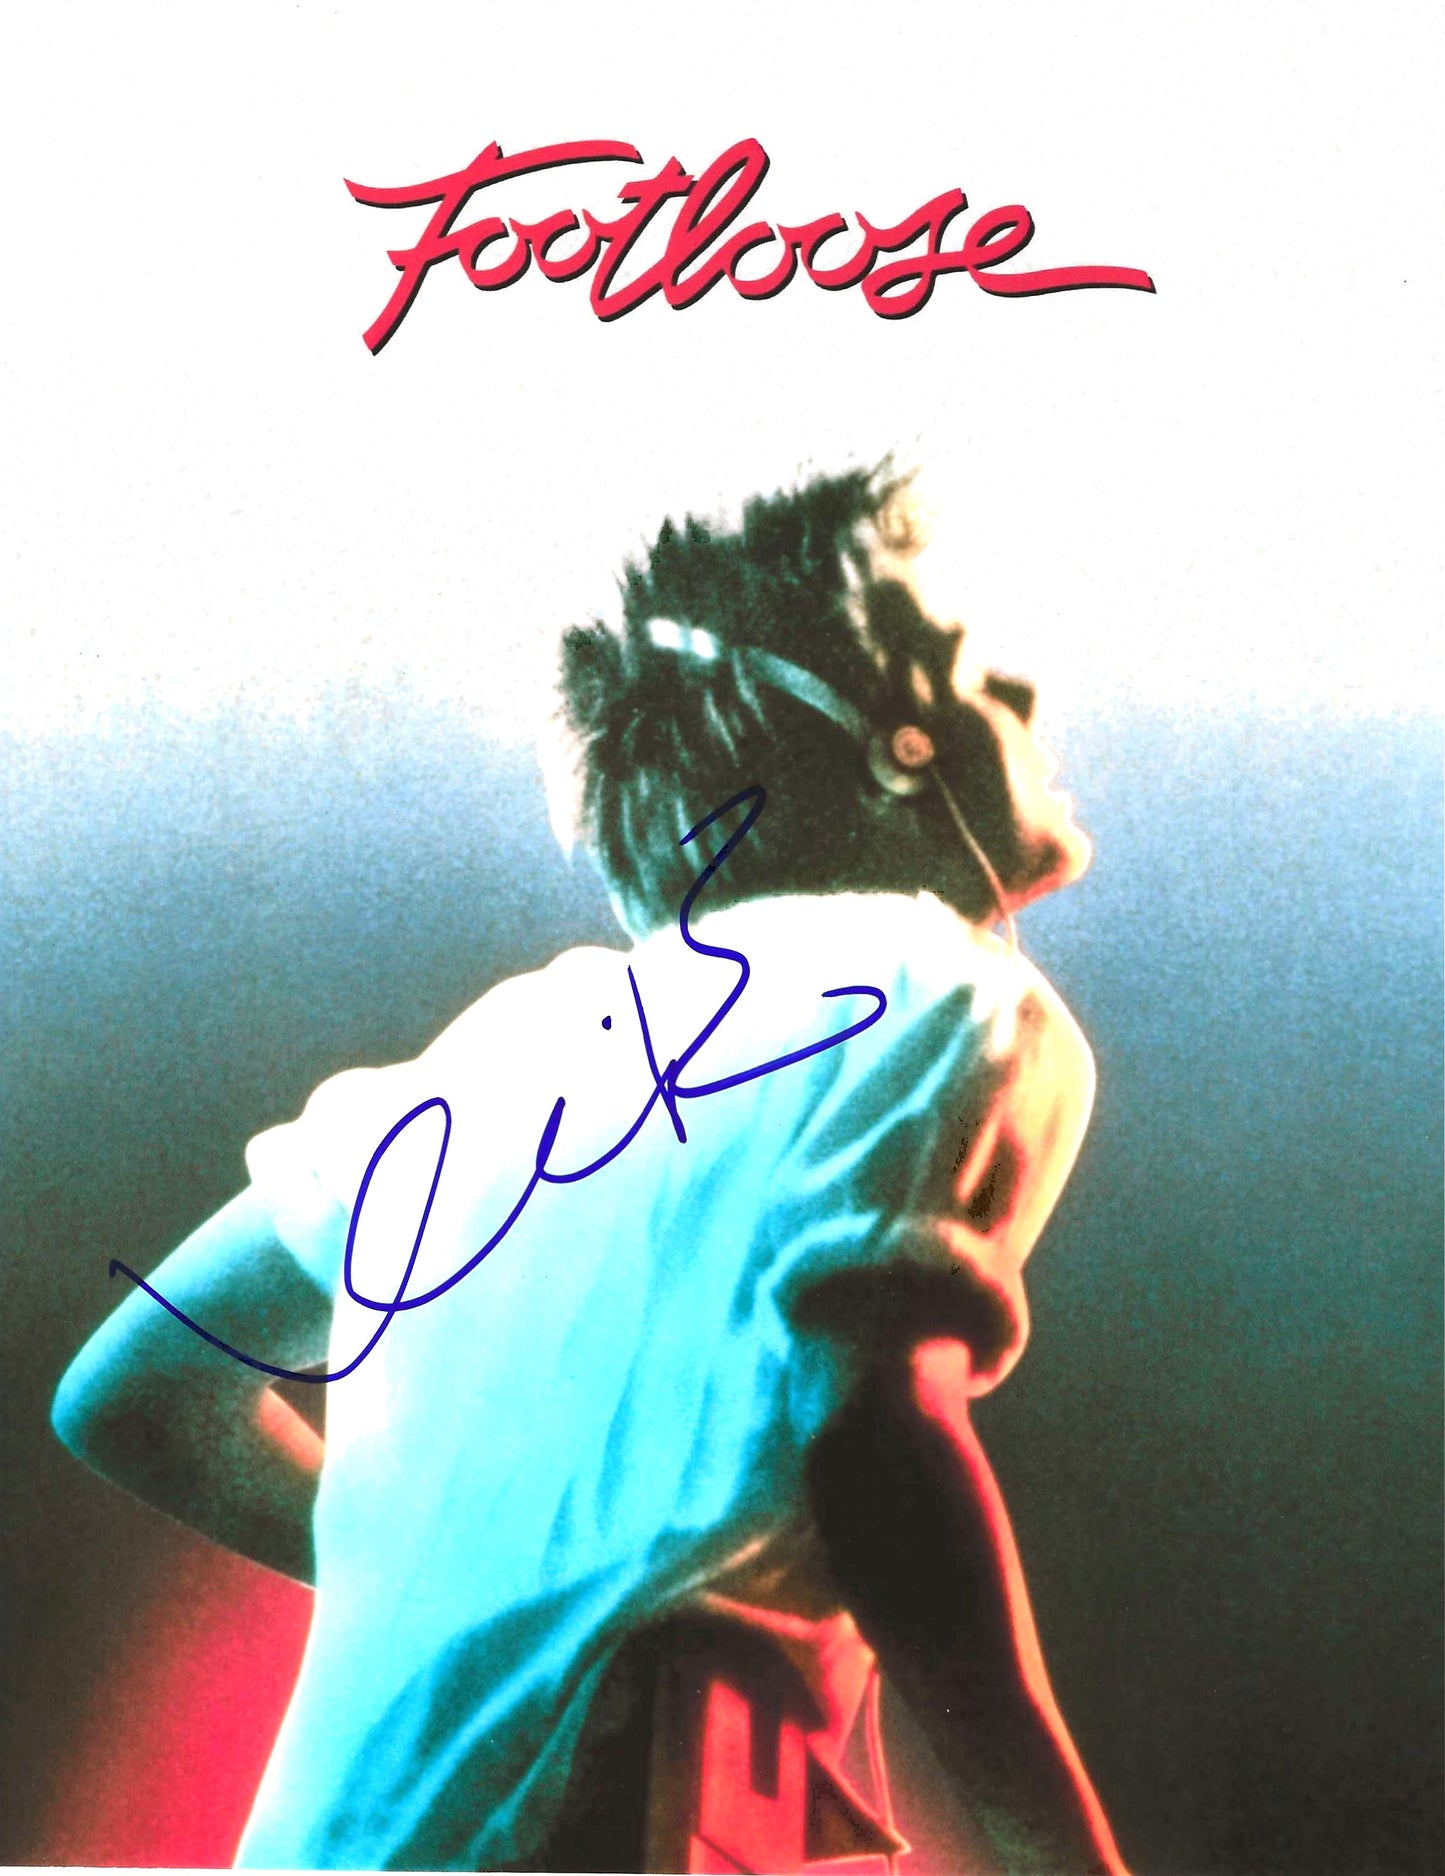 Kevin Bacon Autographed Signed "FOOTLOOSE" 8X10 Photo Elite Promotions & Graphz Authentication